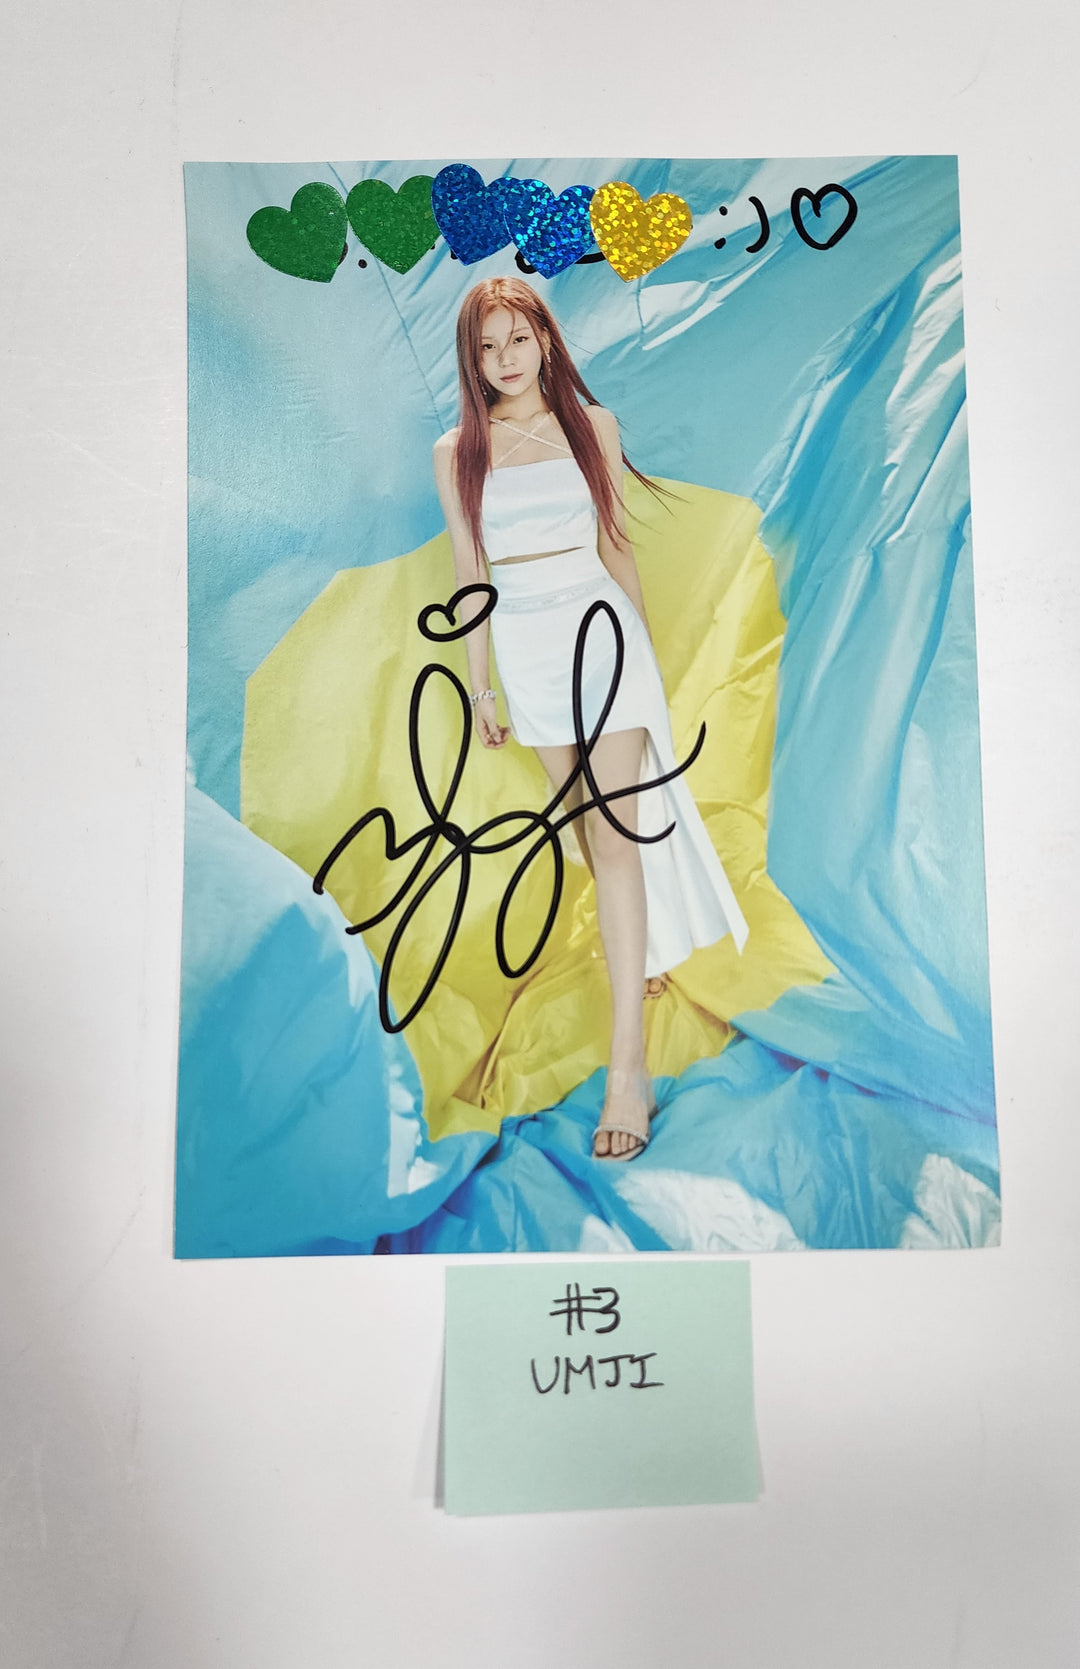 VIVIZ "Summer Vibe" - A Cut Page From Fansign Event Albums